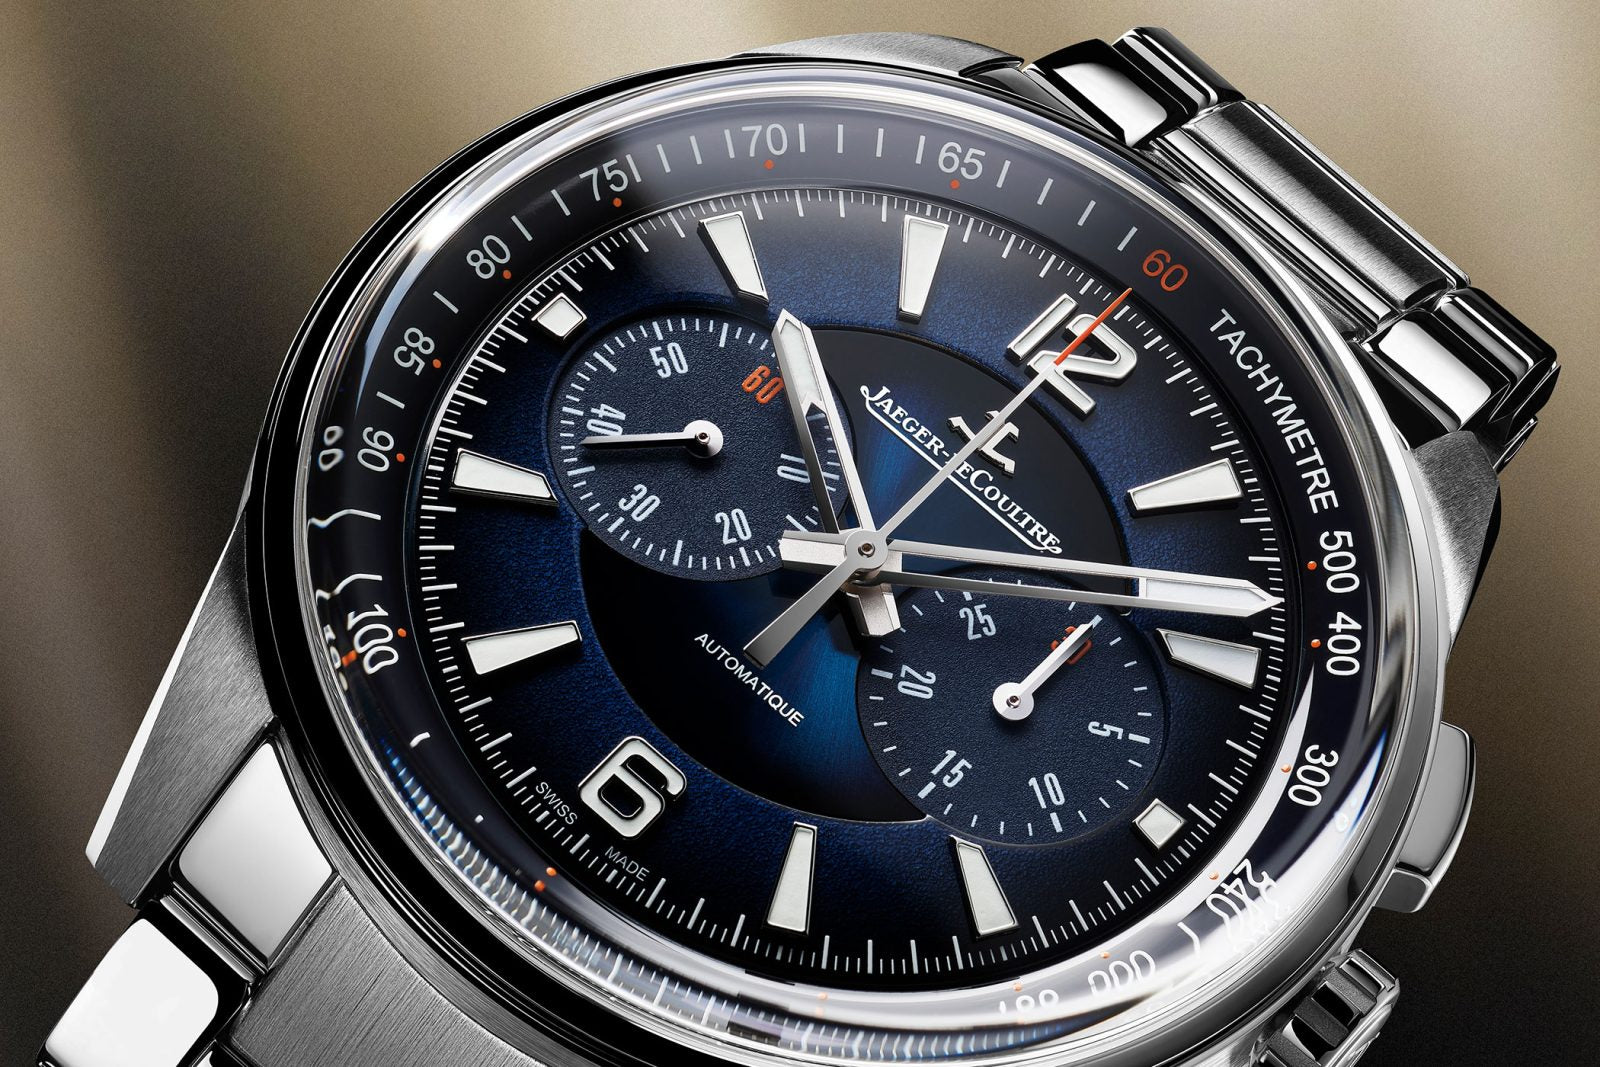 Two new dials for the Jaeger-LeCoultre Polaris Chronograph